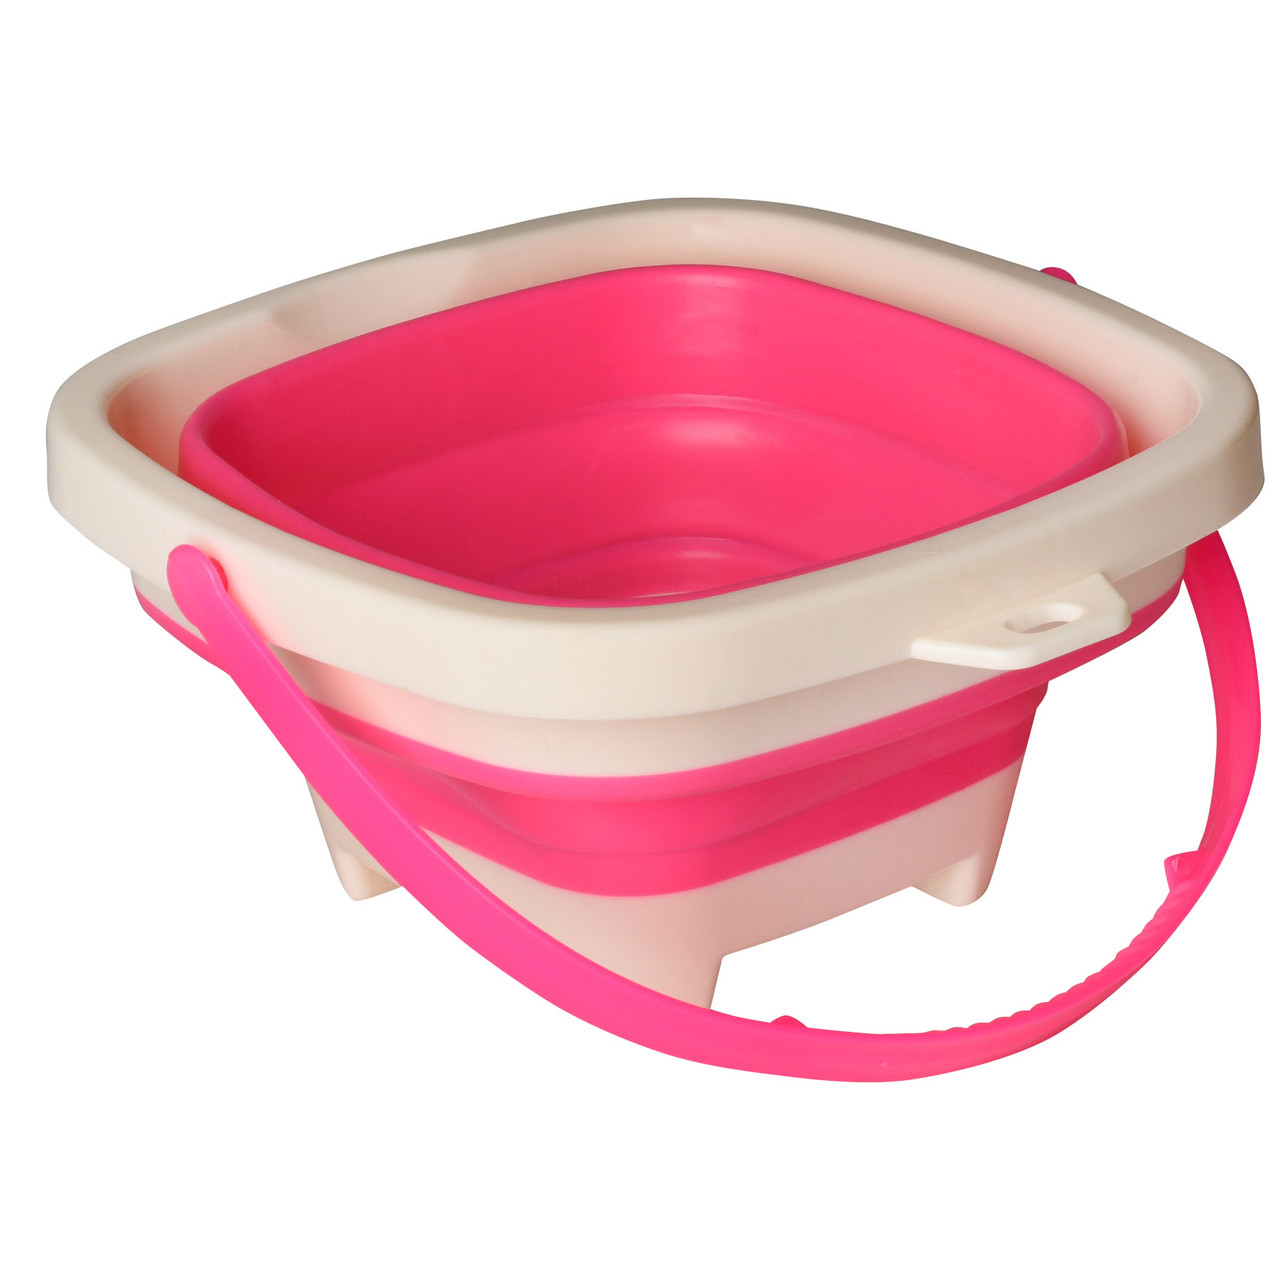 PlayKidz Collapsible Buckets, Set of 3 Compact 2-Liter Silicone